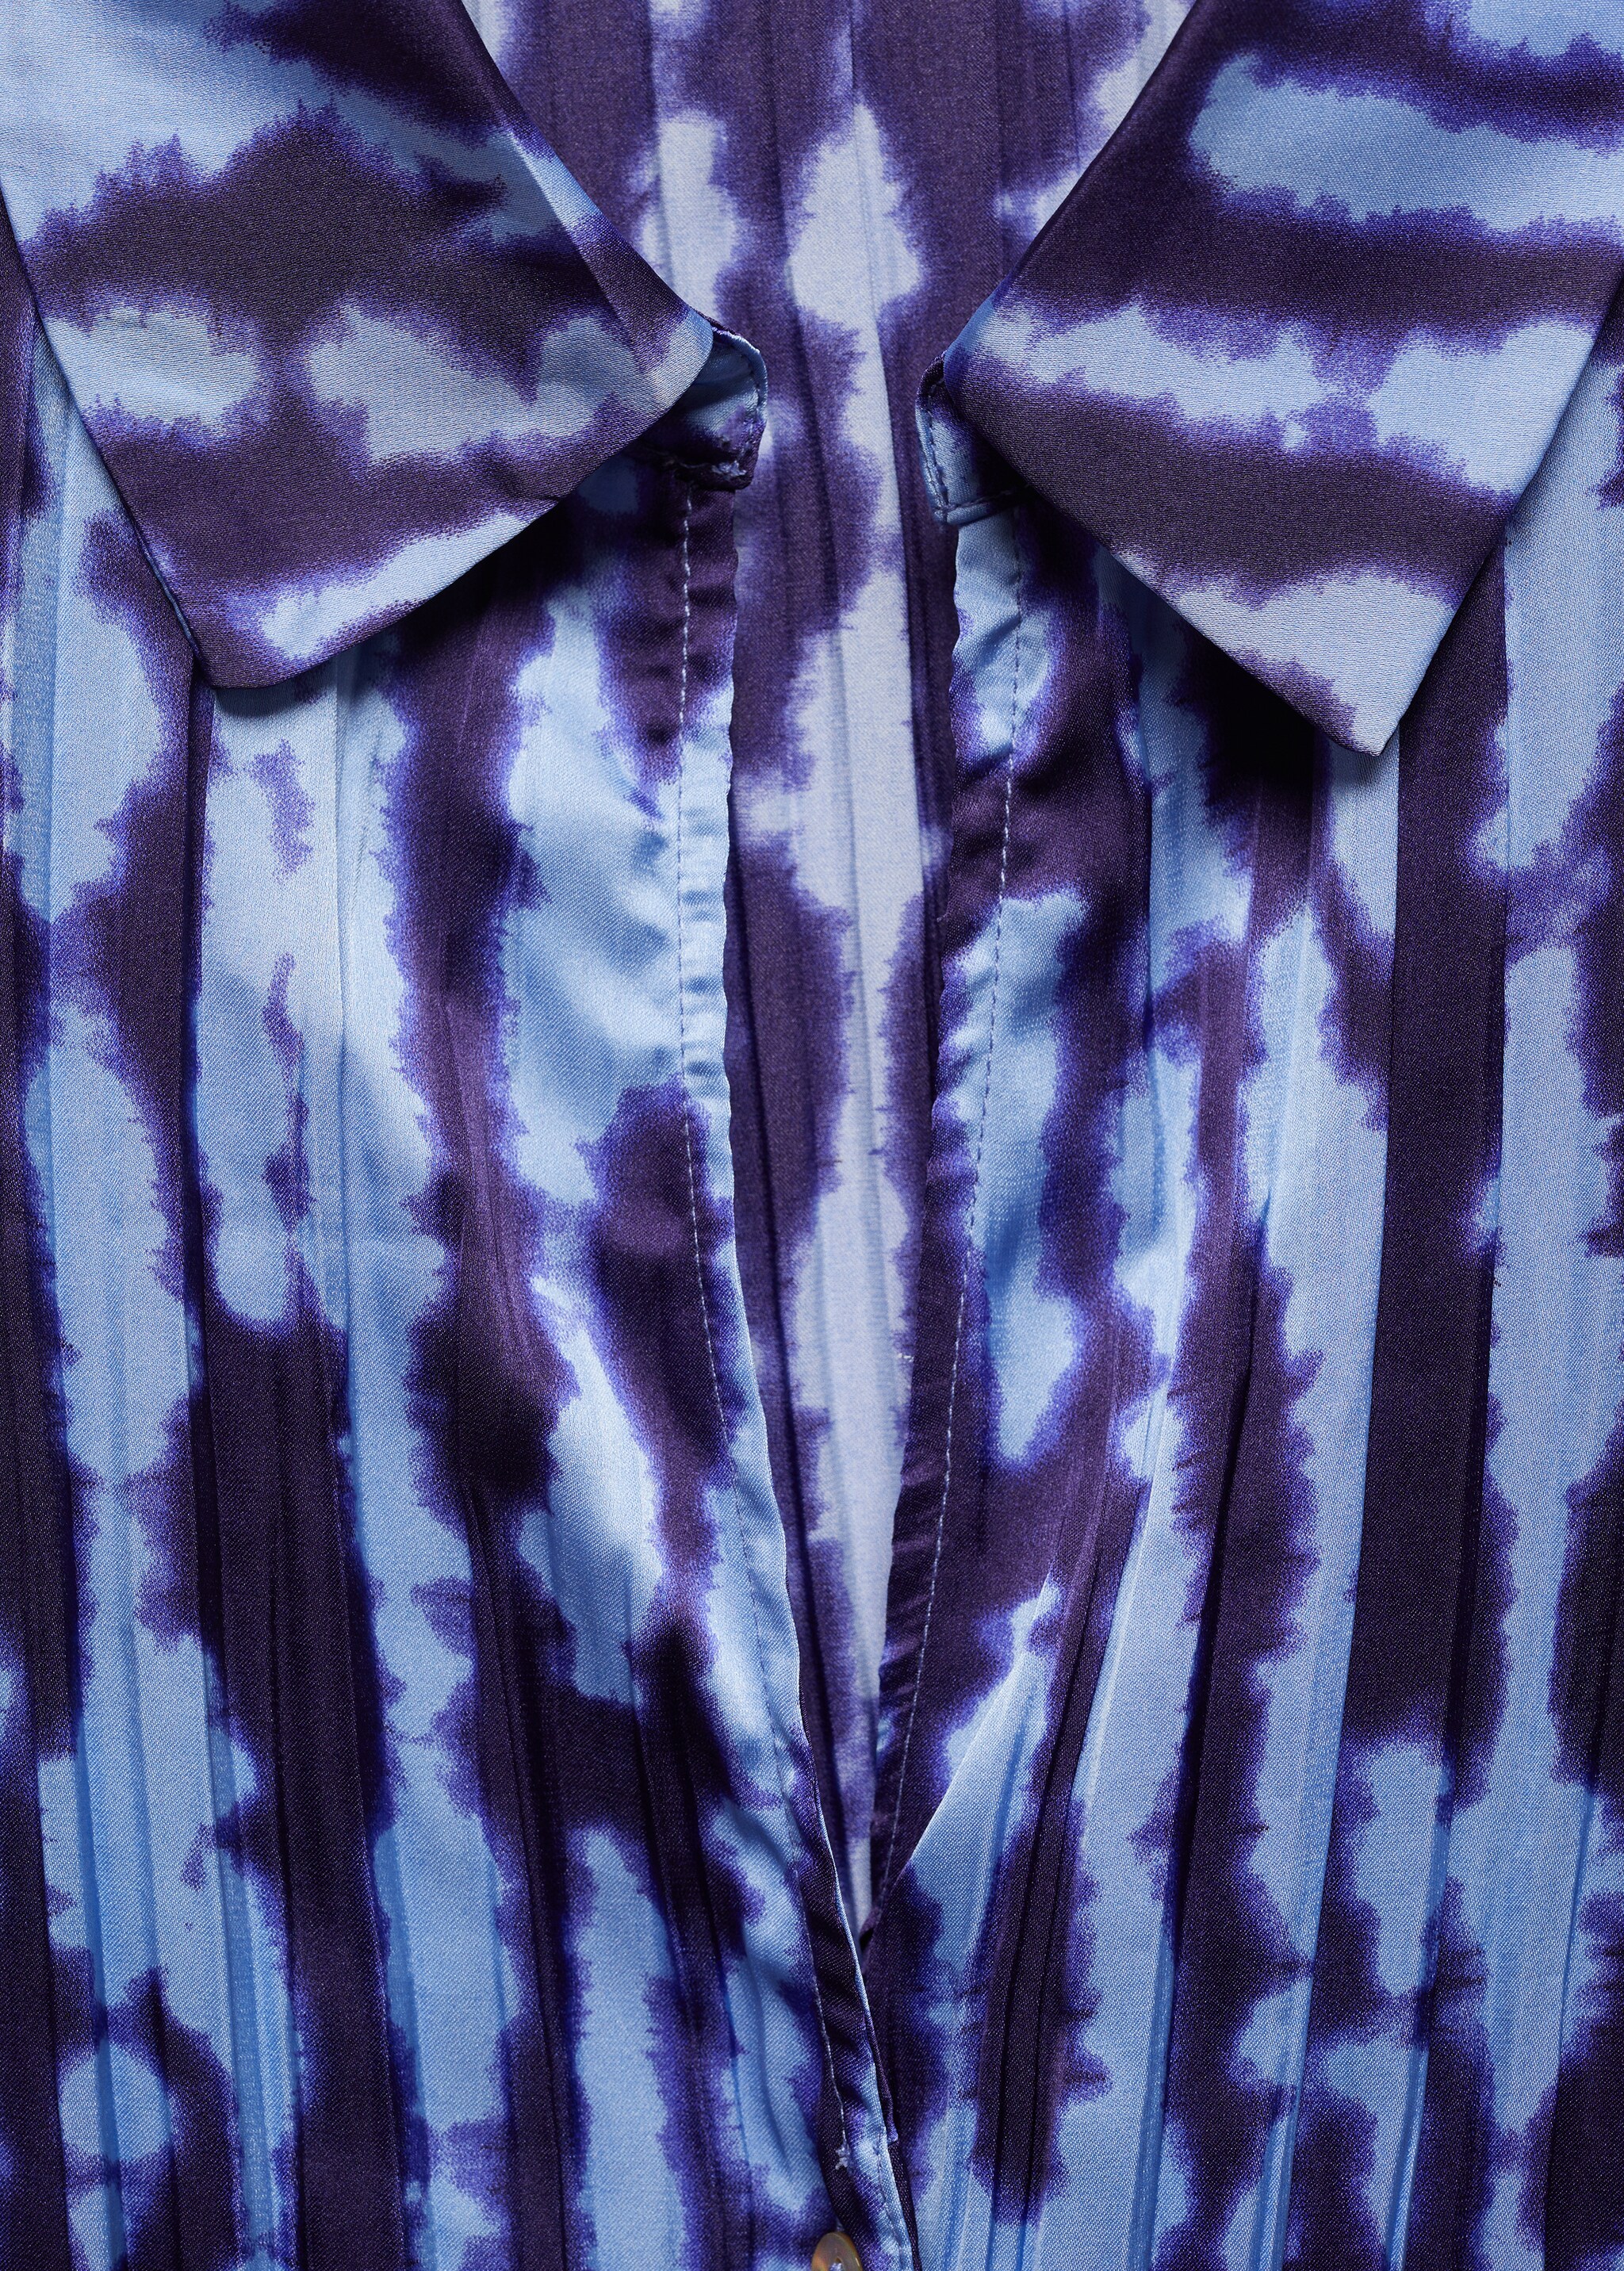 Printed shirred shirt - Details of the article 8